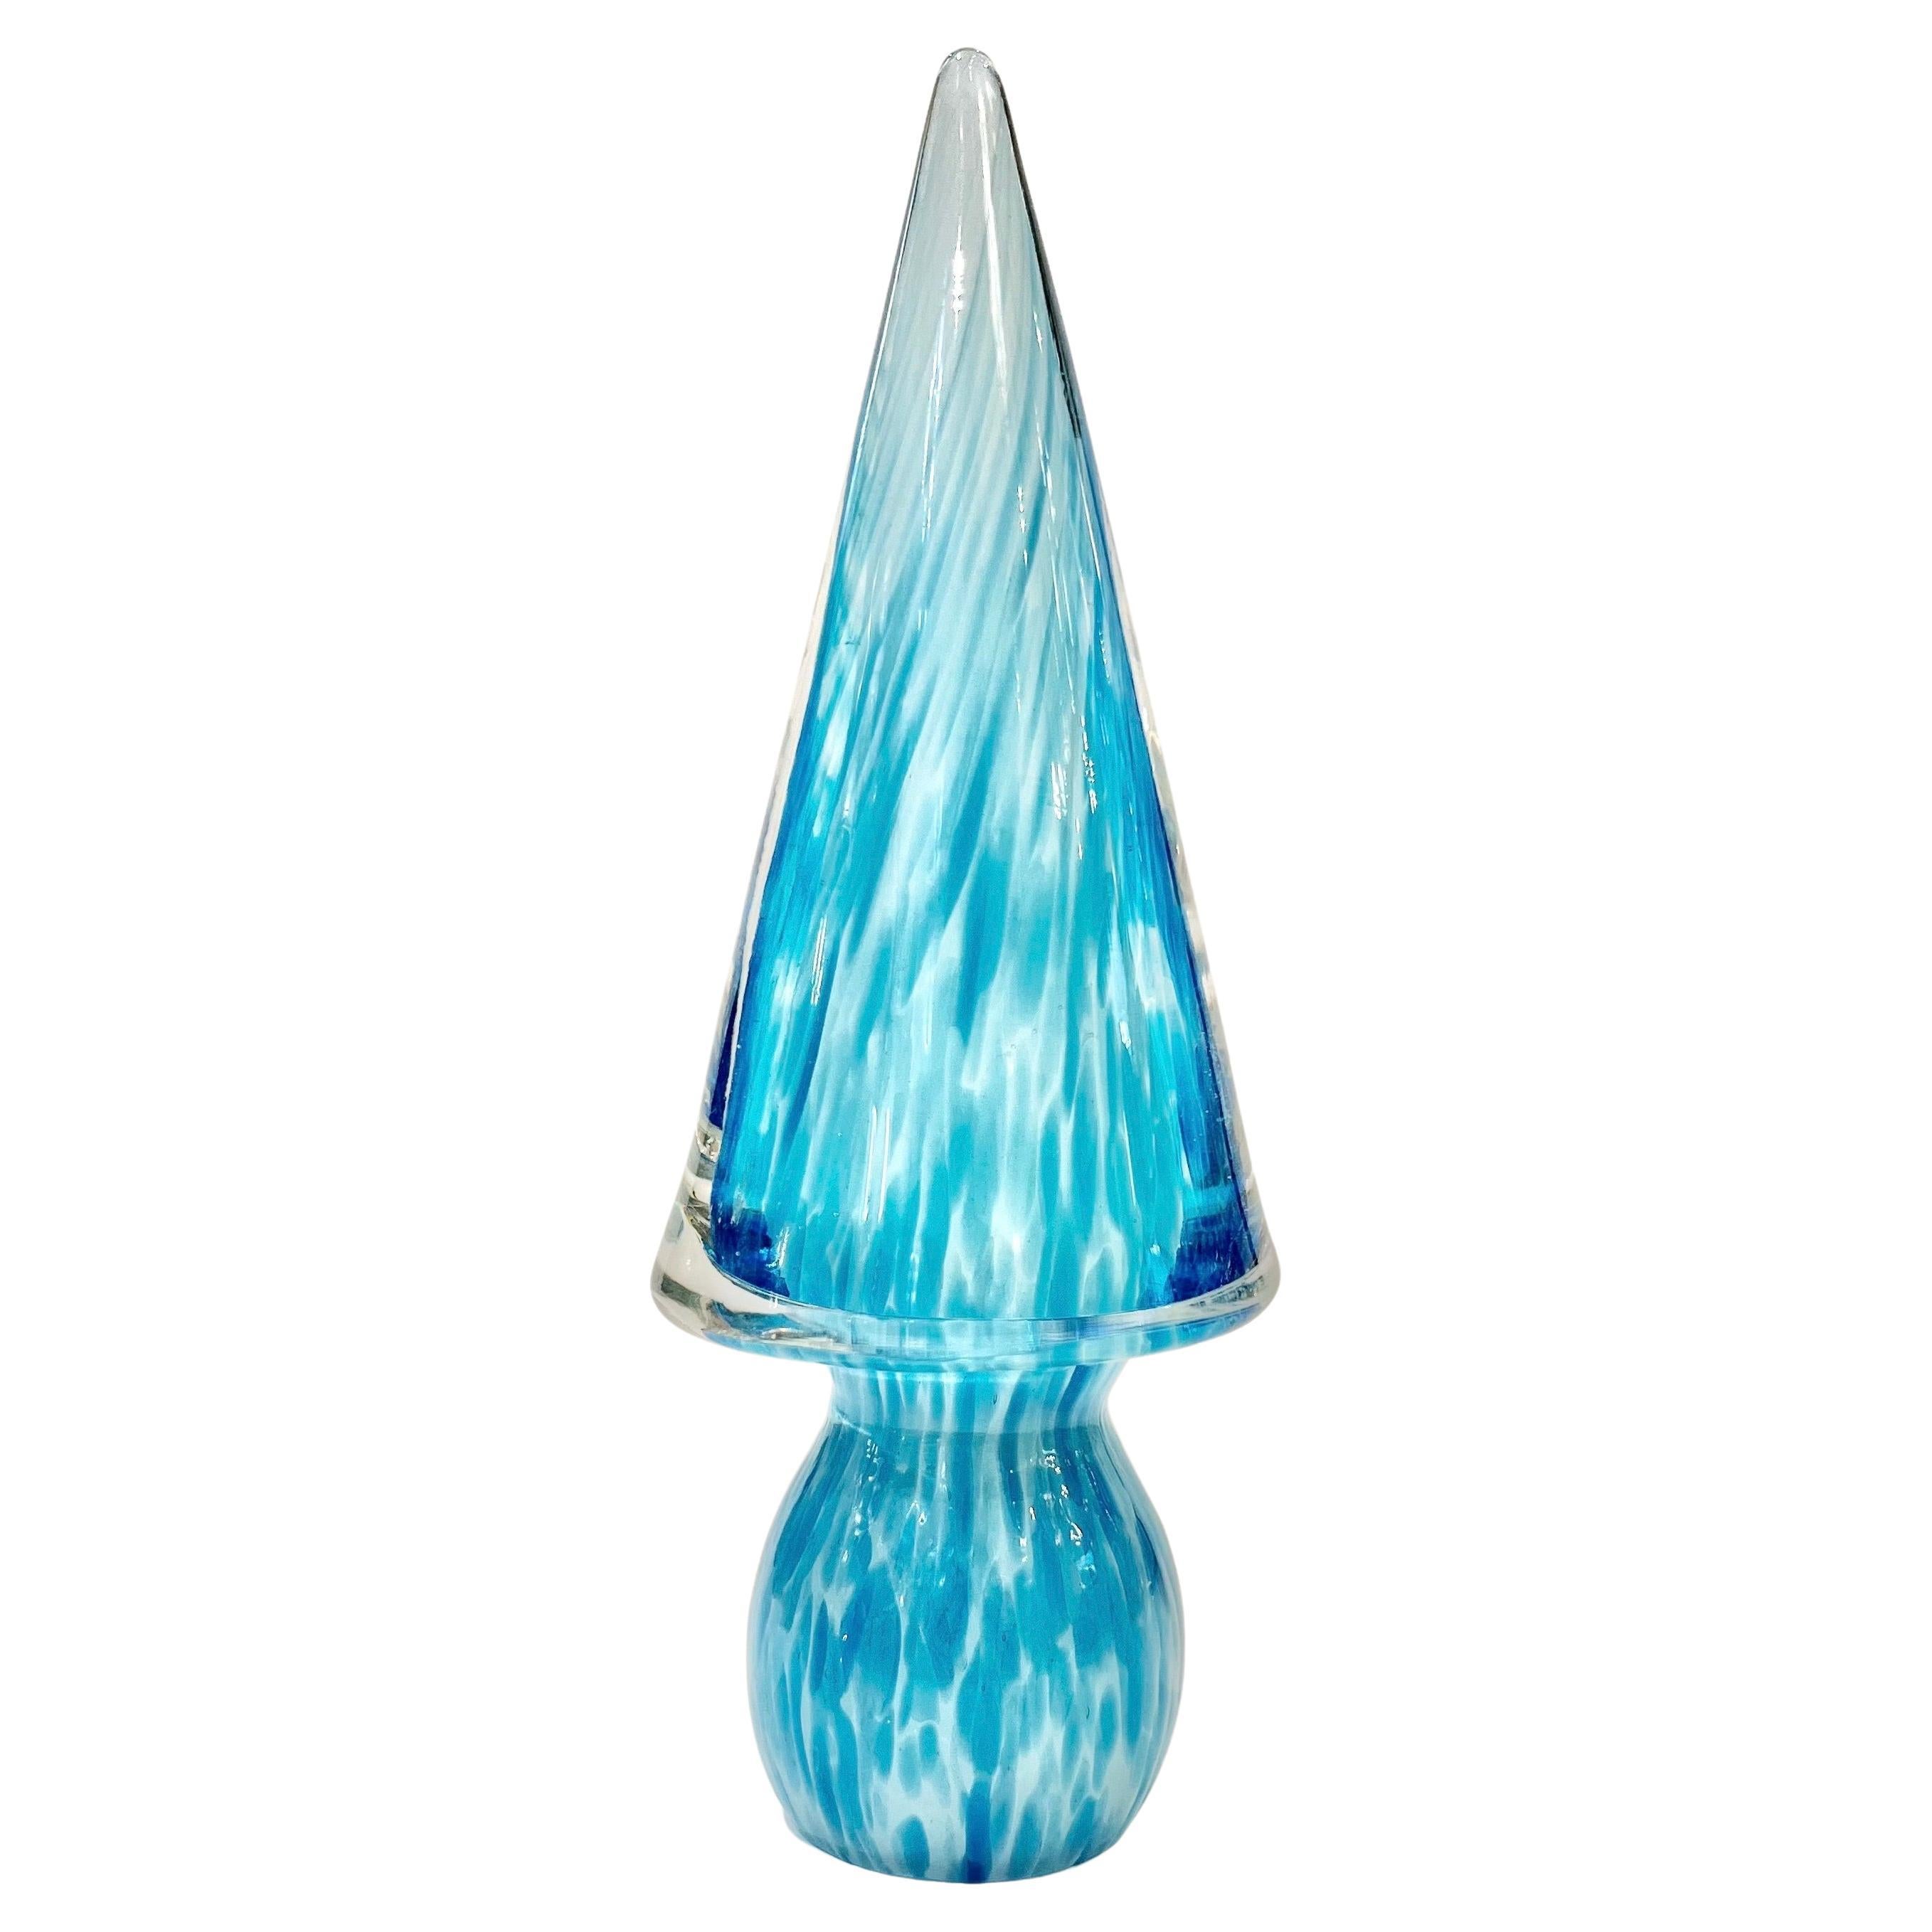 Formia 1980s Italian Vintage Turquoise Blue & White Murano Glass Tree Sculpture For Sale